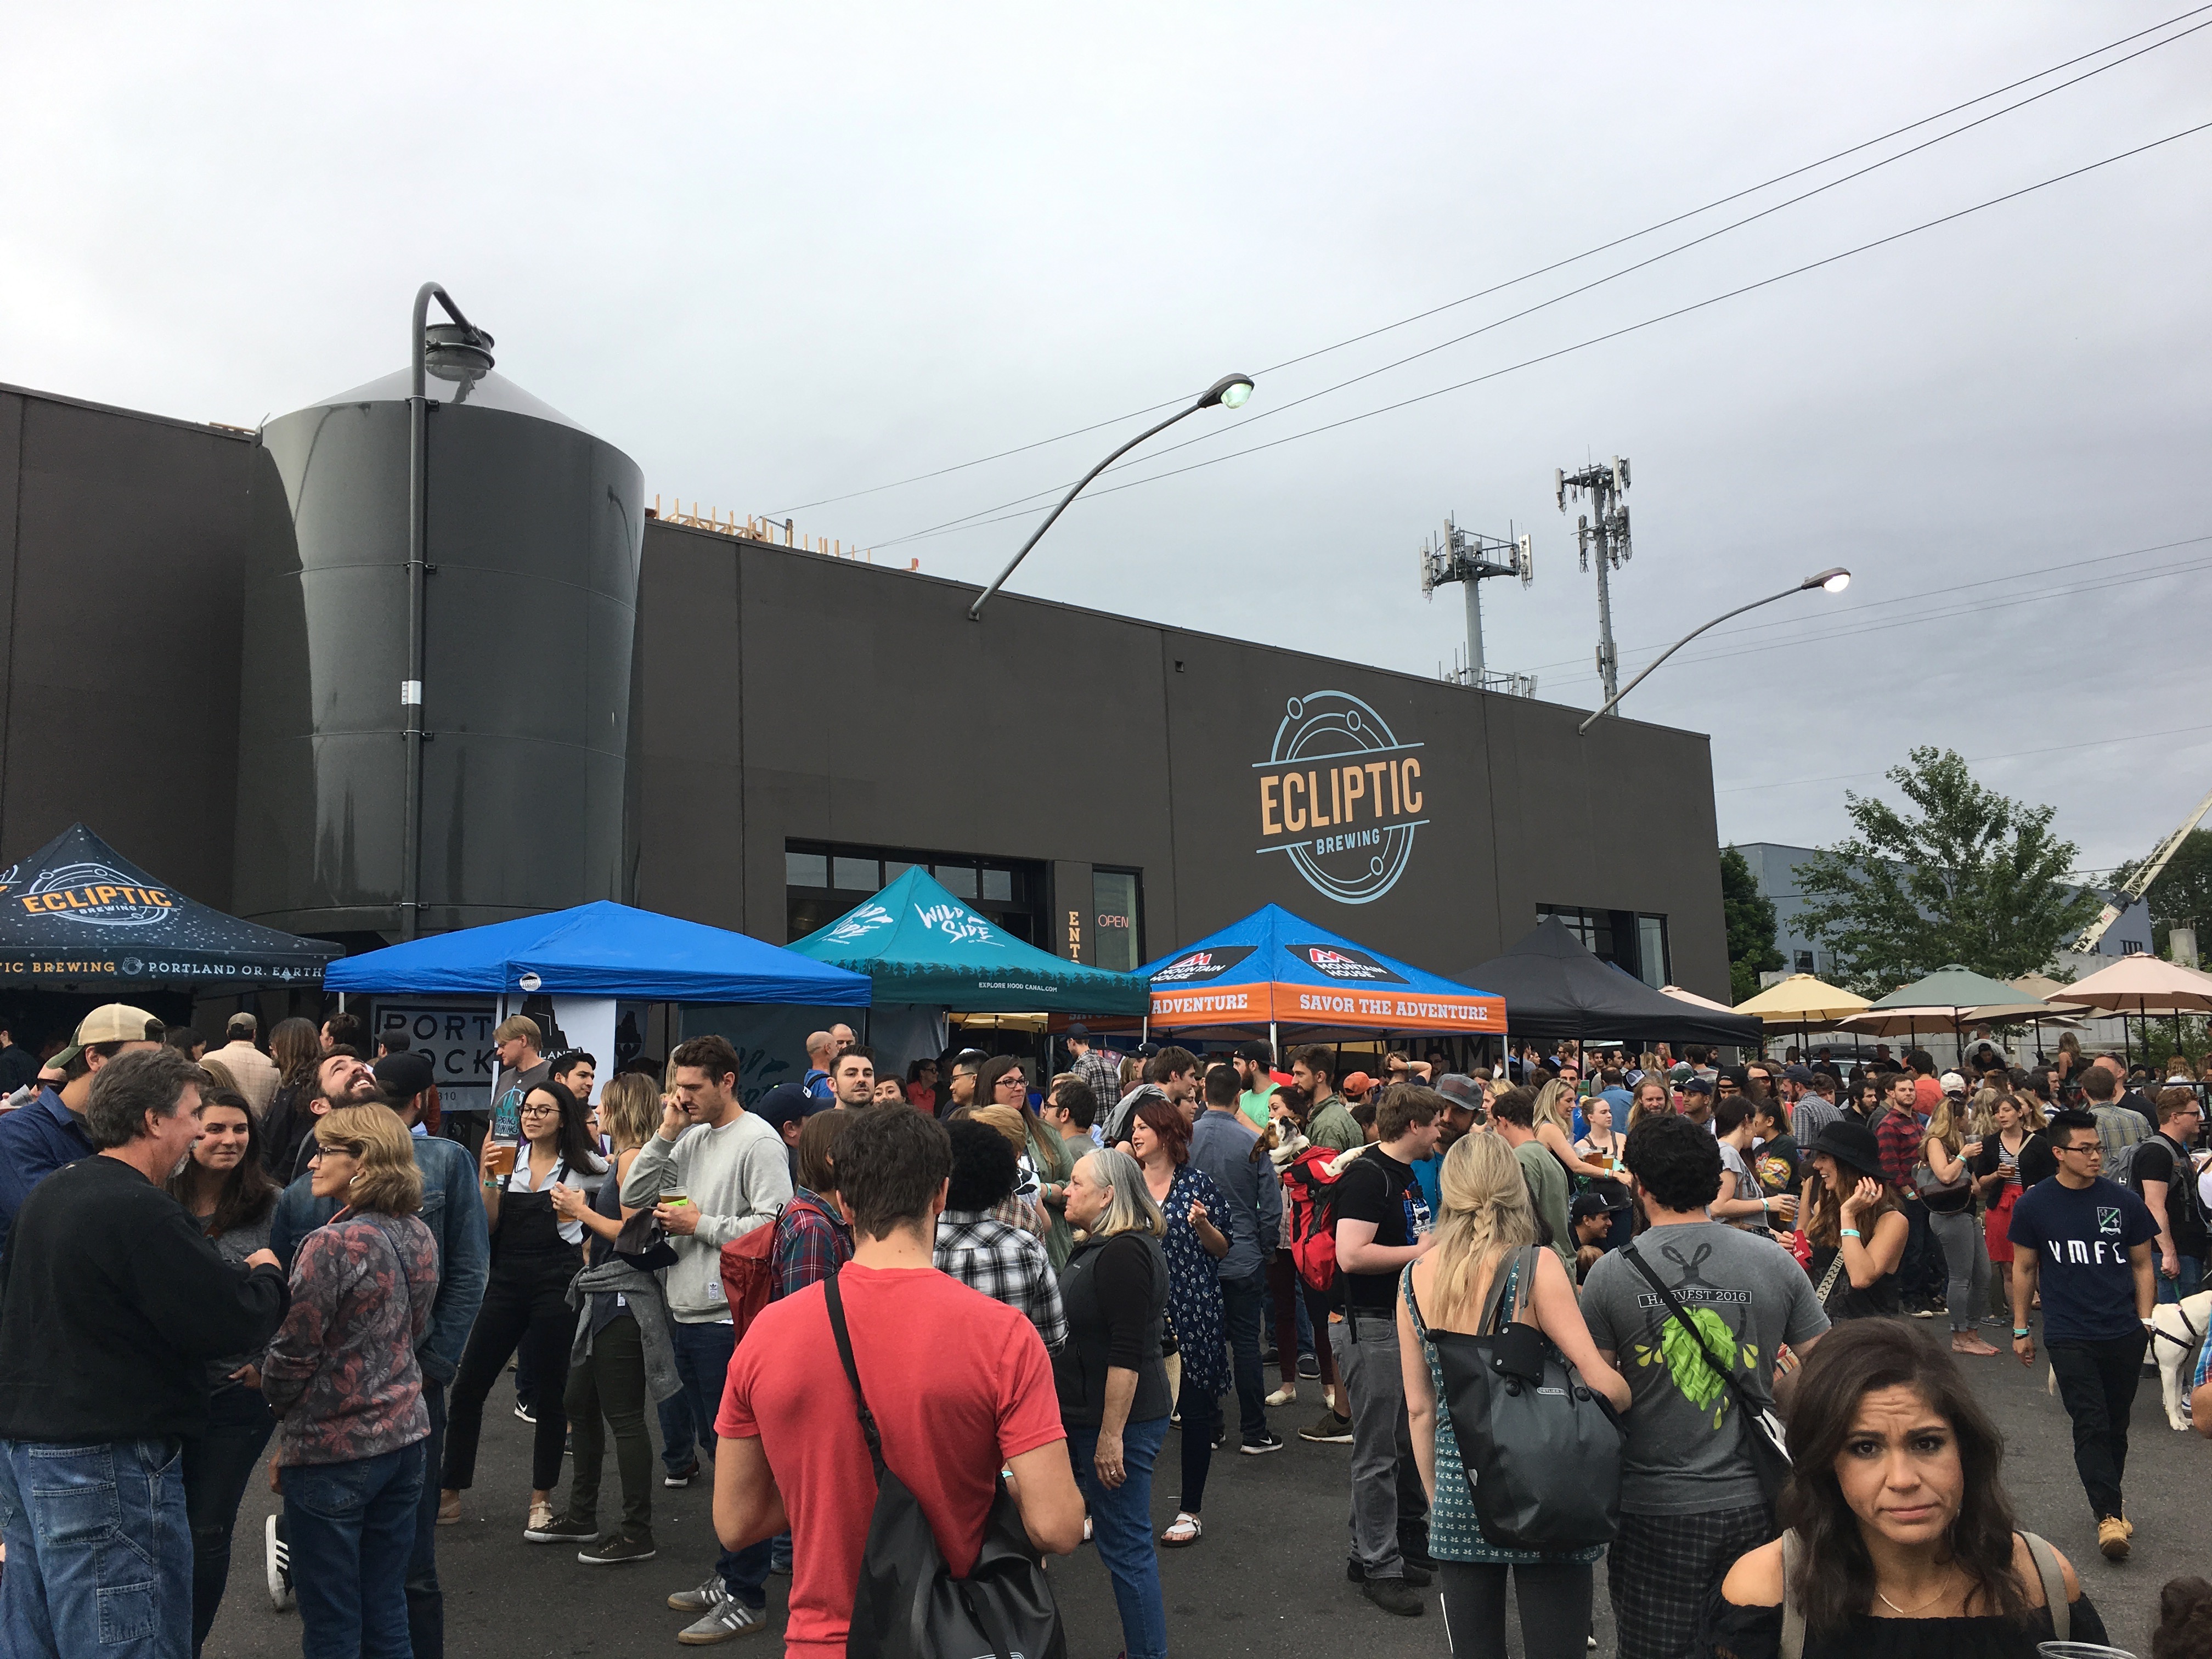 Solstice Block Party at Ecliptic Brewing brought out a very large crowd.